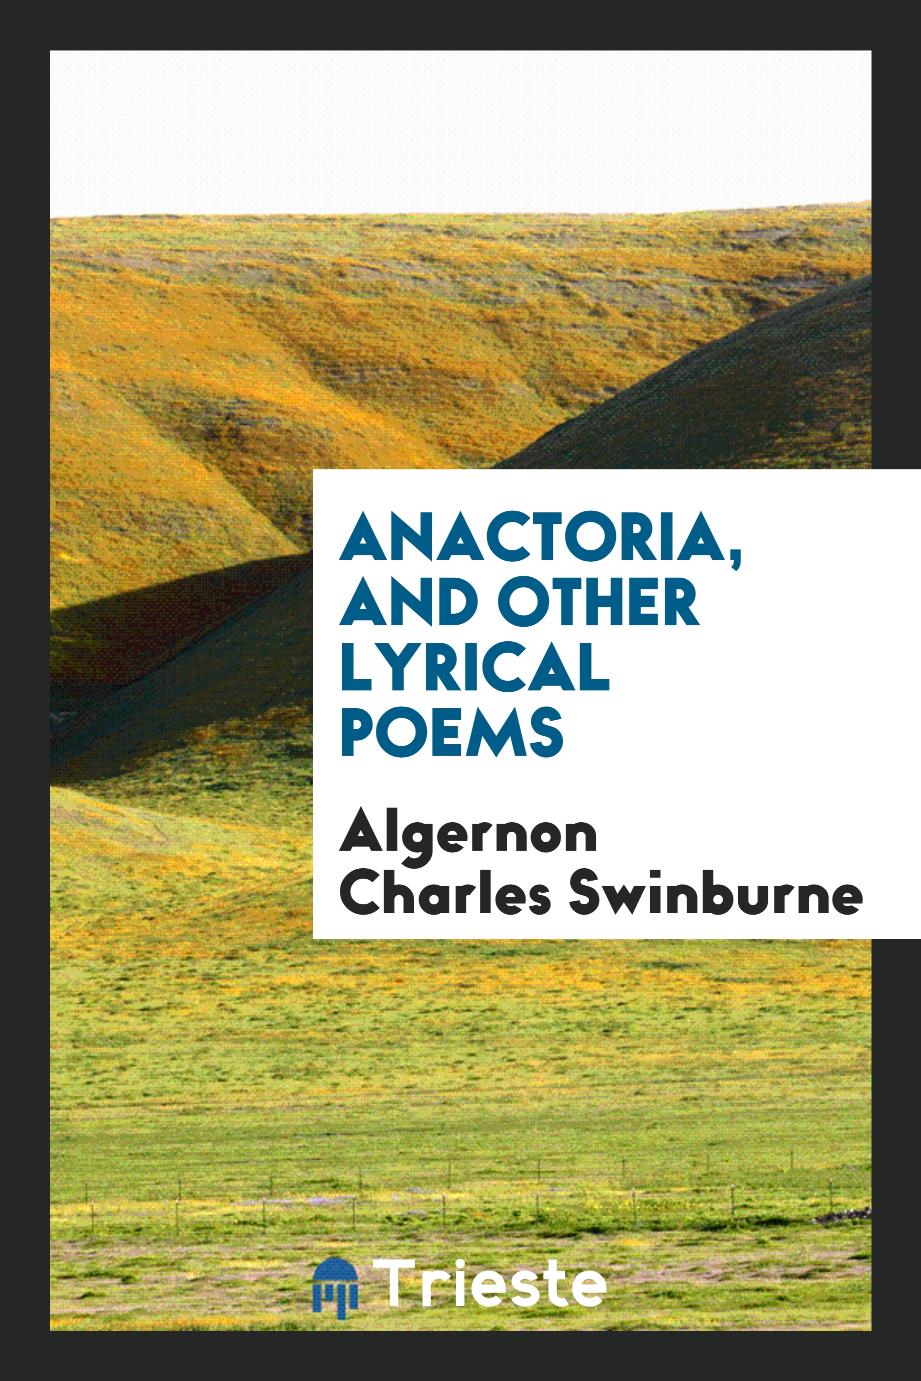 Anactoria, and other lyrical poems